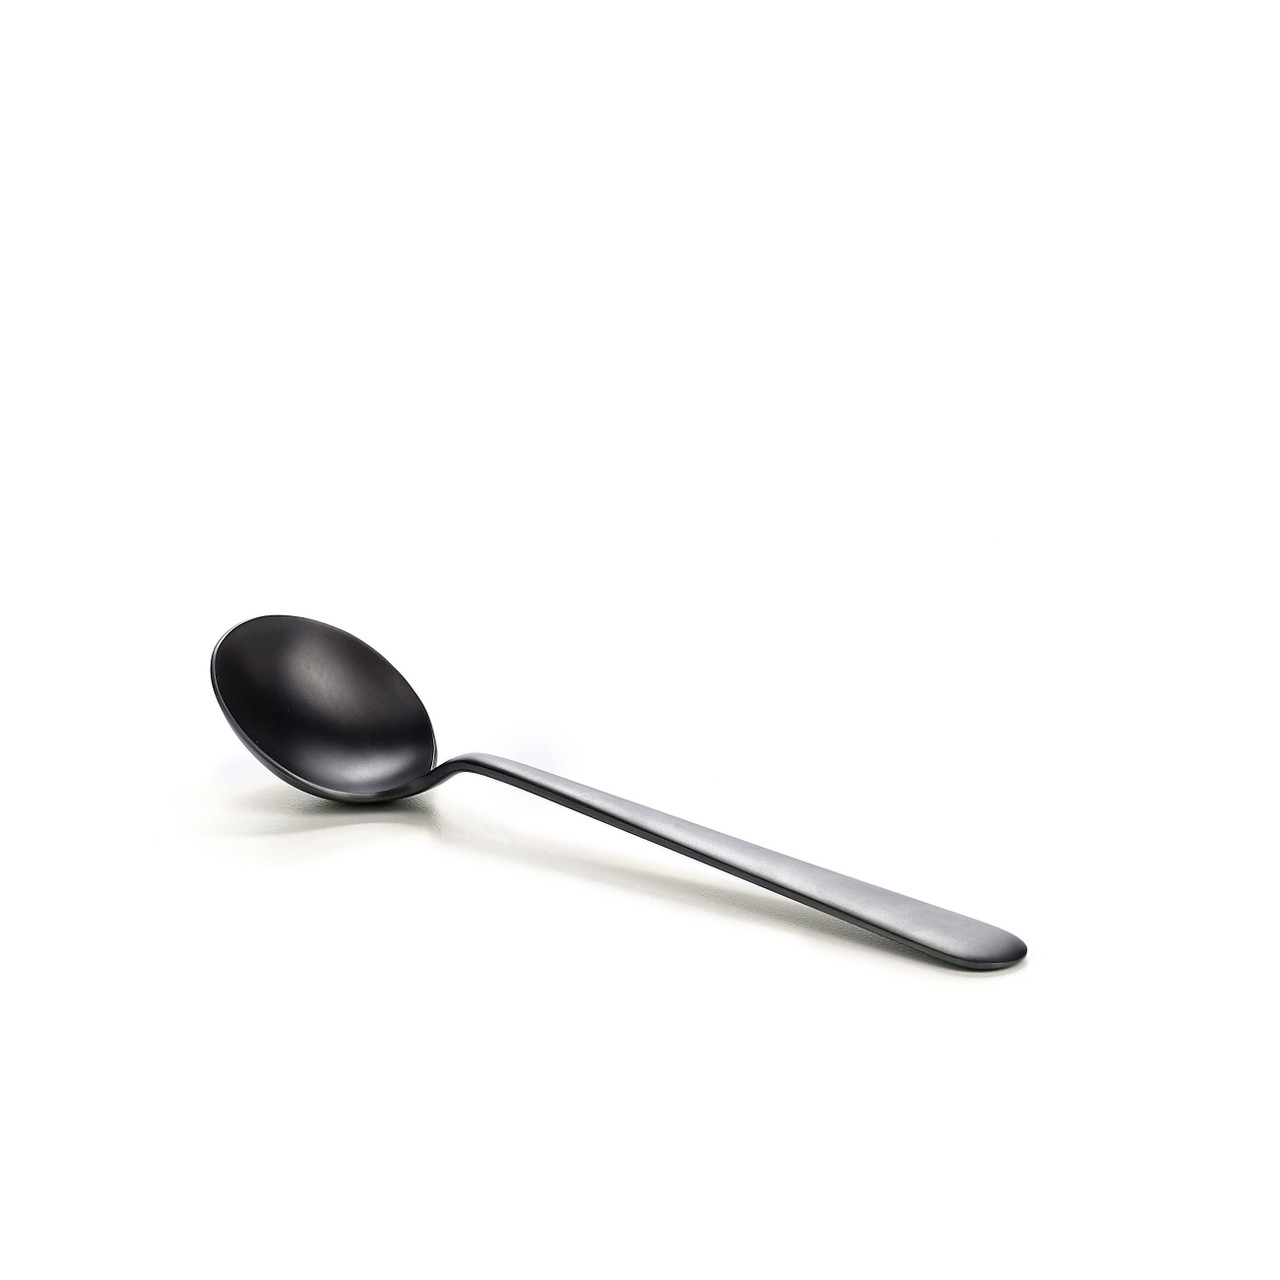 https://cdn11.bigcommerce.com/s-6h7ychjk4/images/stencil/1280x1280/products/8176/89288/hario-kasuya-cupping-spoon-matte-black-angle__25320.1597181749.jpg?c=1